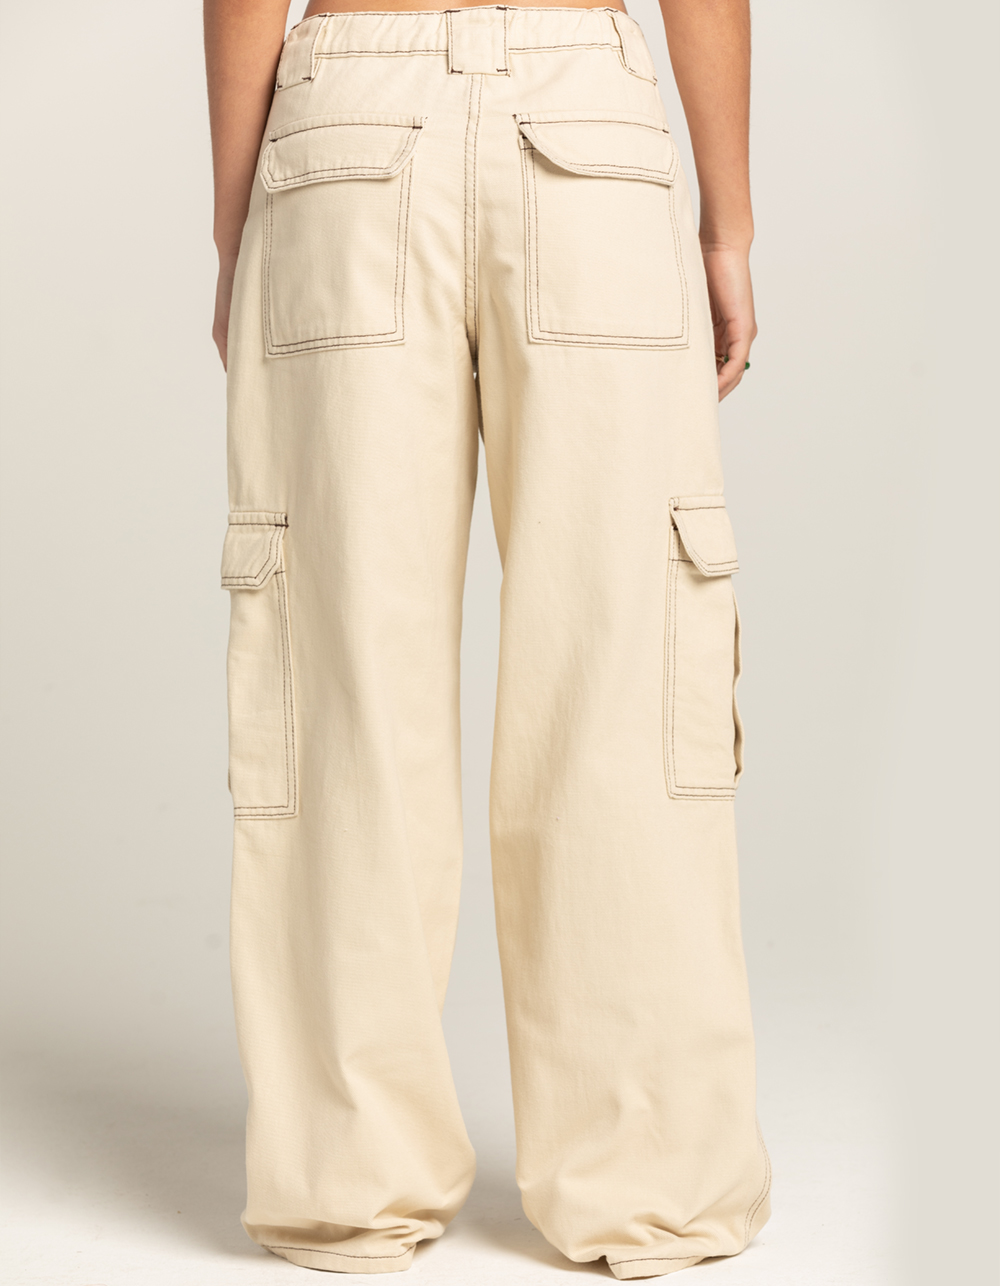 Women Baggy Cargo Pants With Pocket